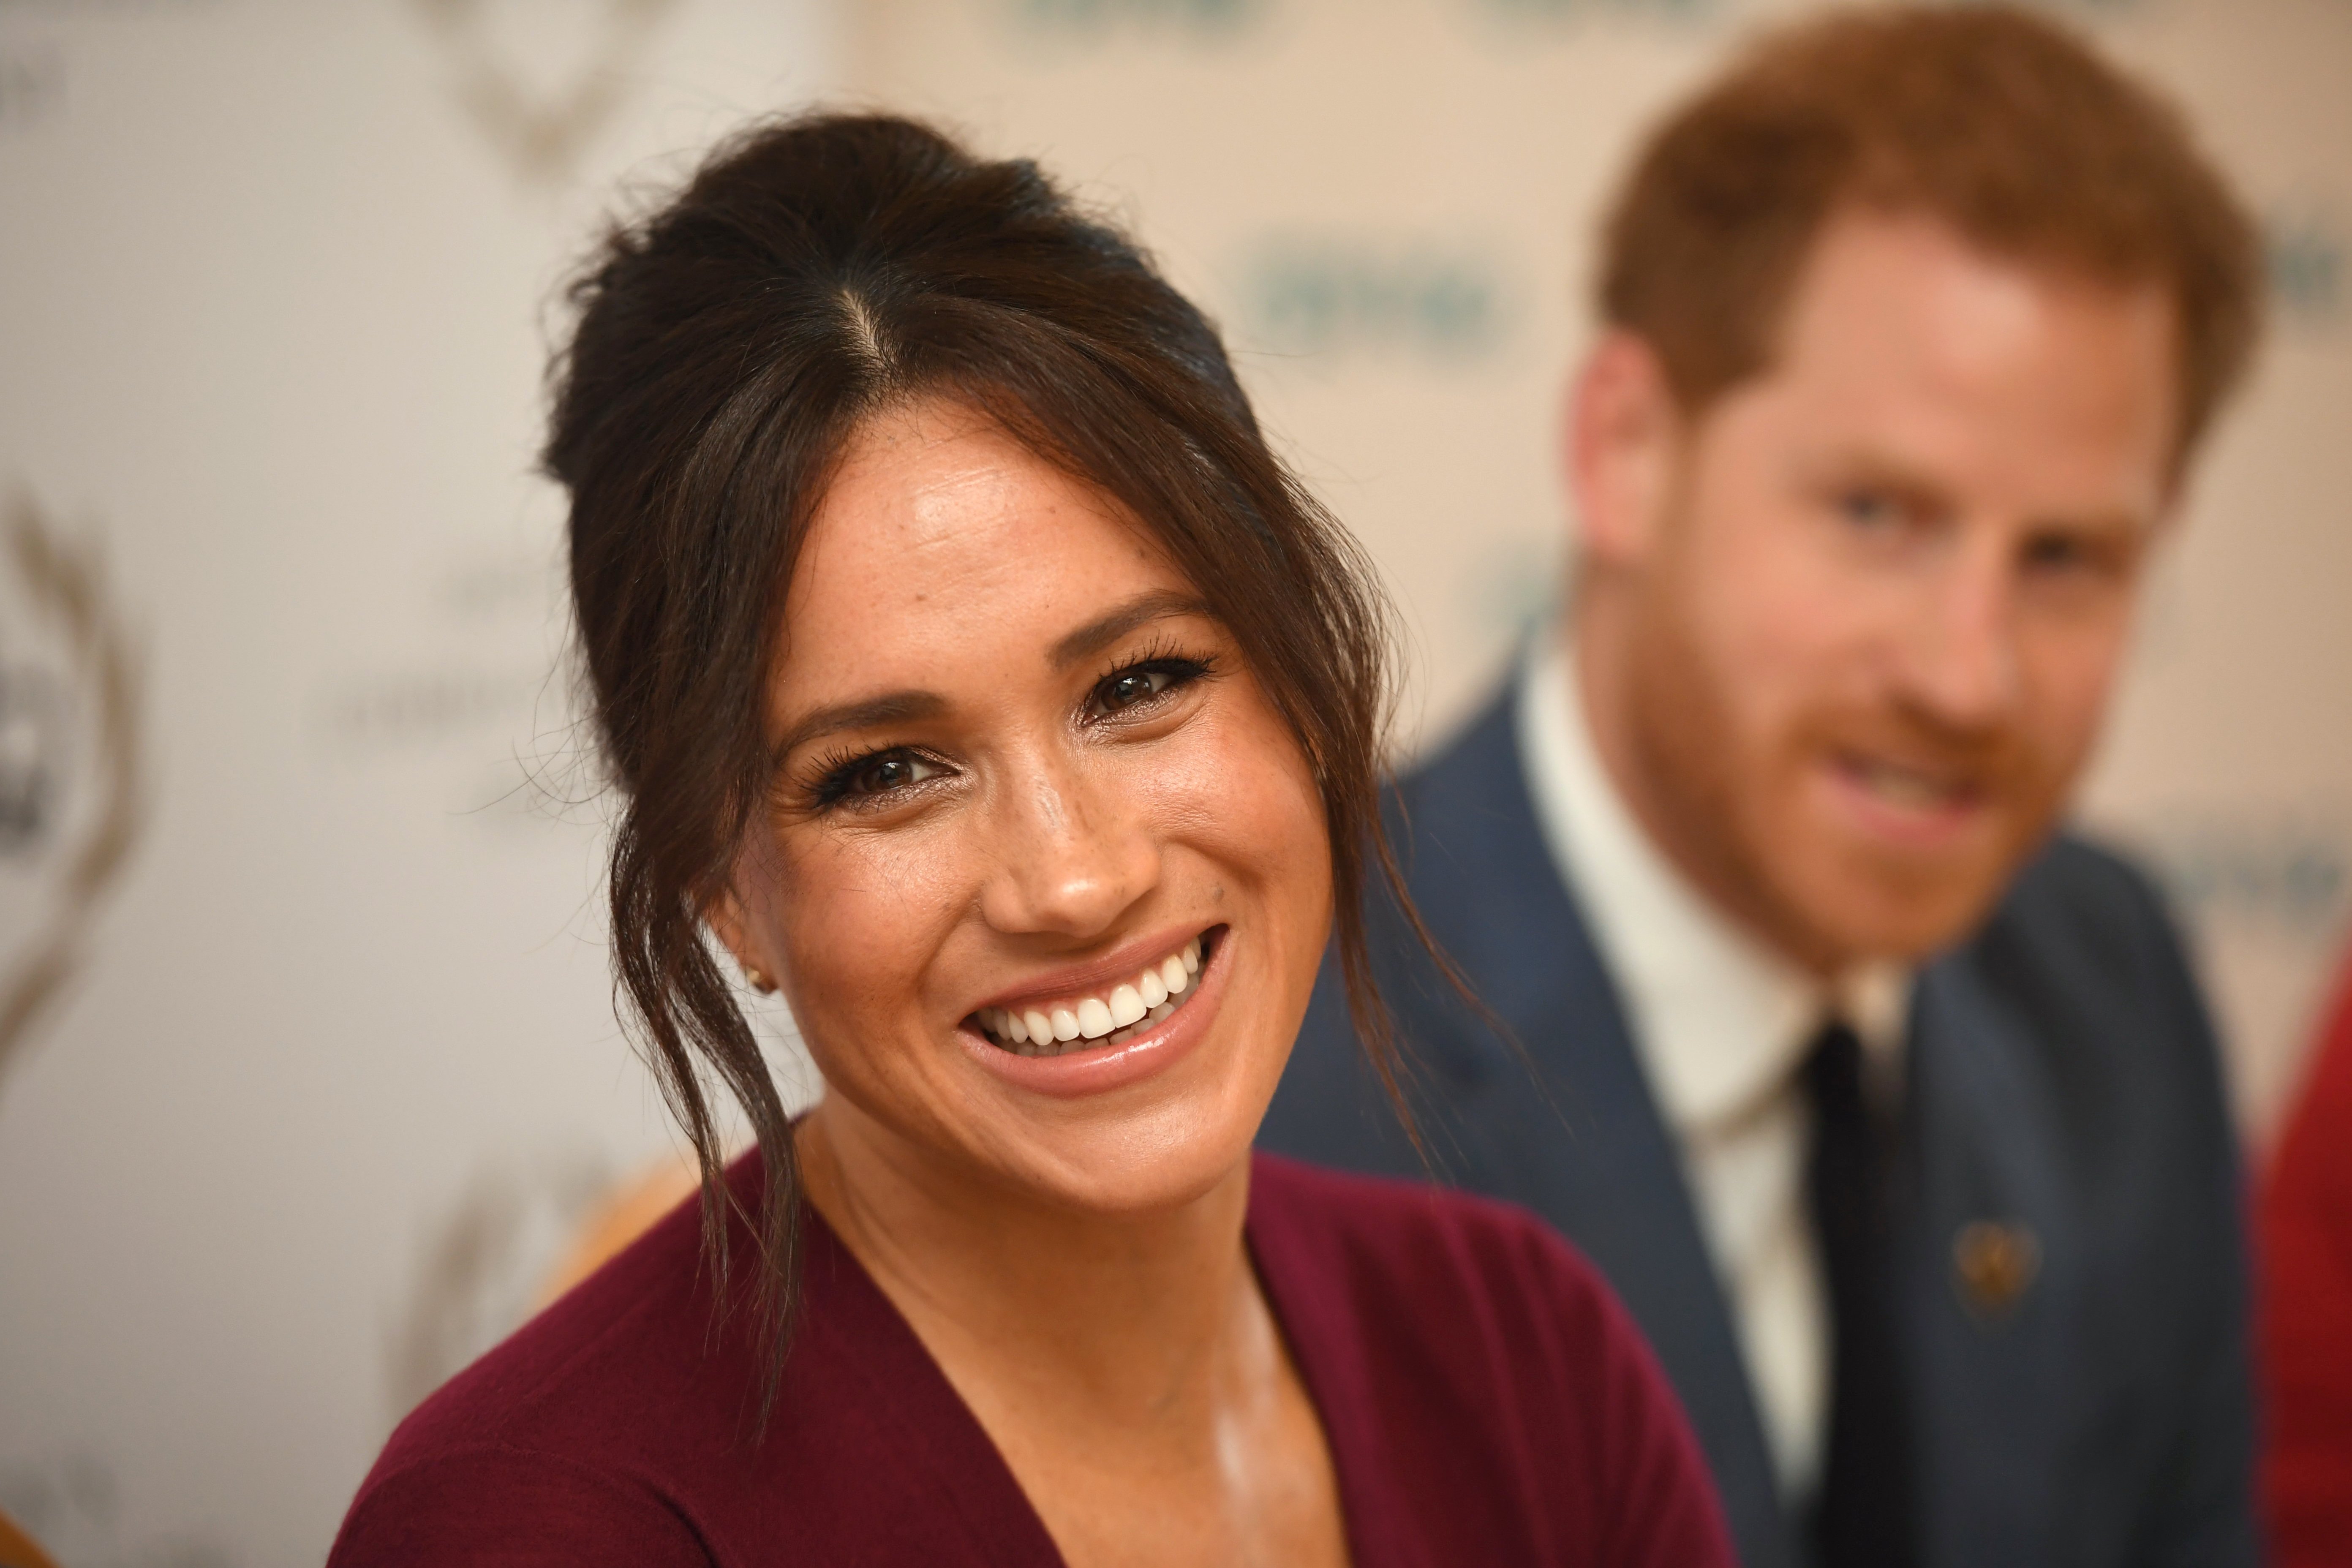 Meghan Markle attends a discussion on gender equality at the Queens Commonwealth Trust in Windsor, England on October 25. 2019 | Photo: Getty Images